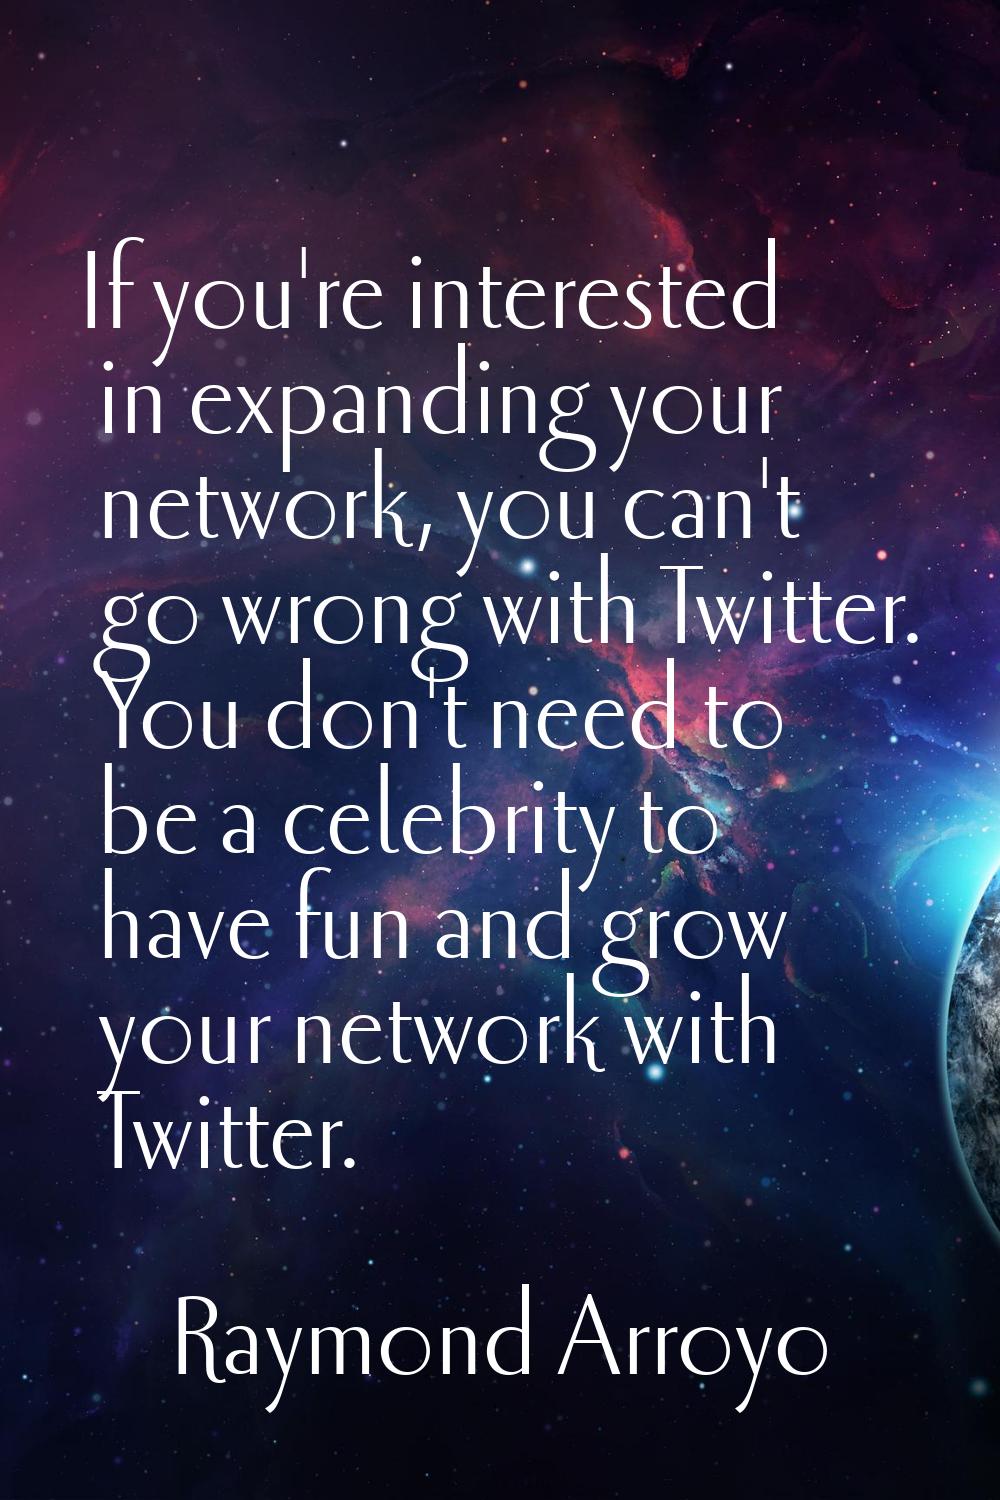 If you're interested in expanding your network, you can't go wrong with Twitter. You don't need to 